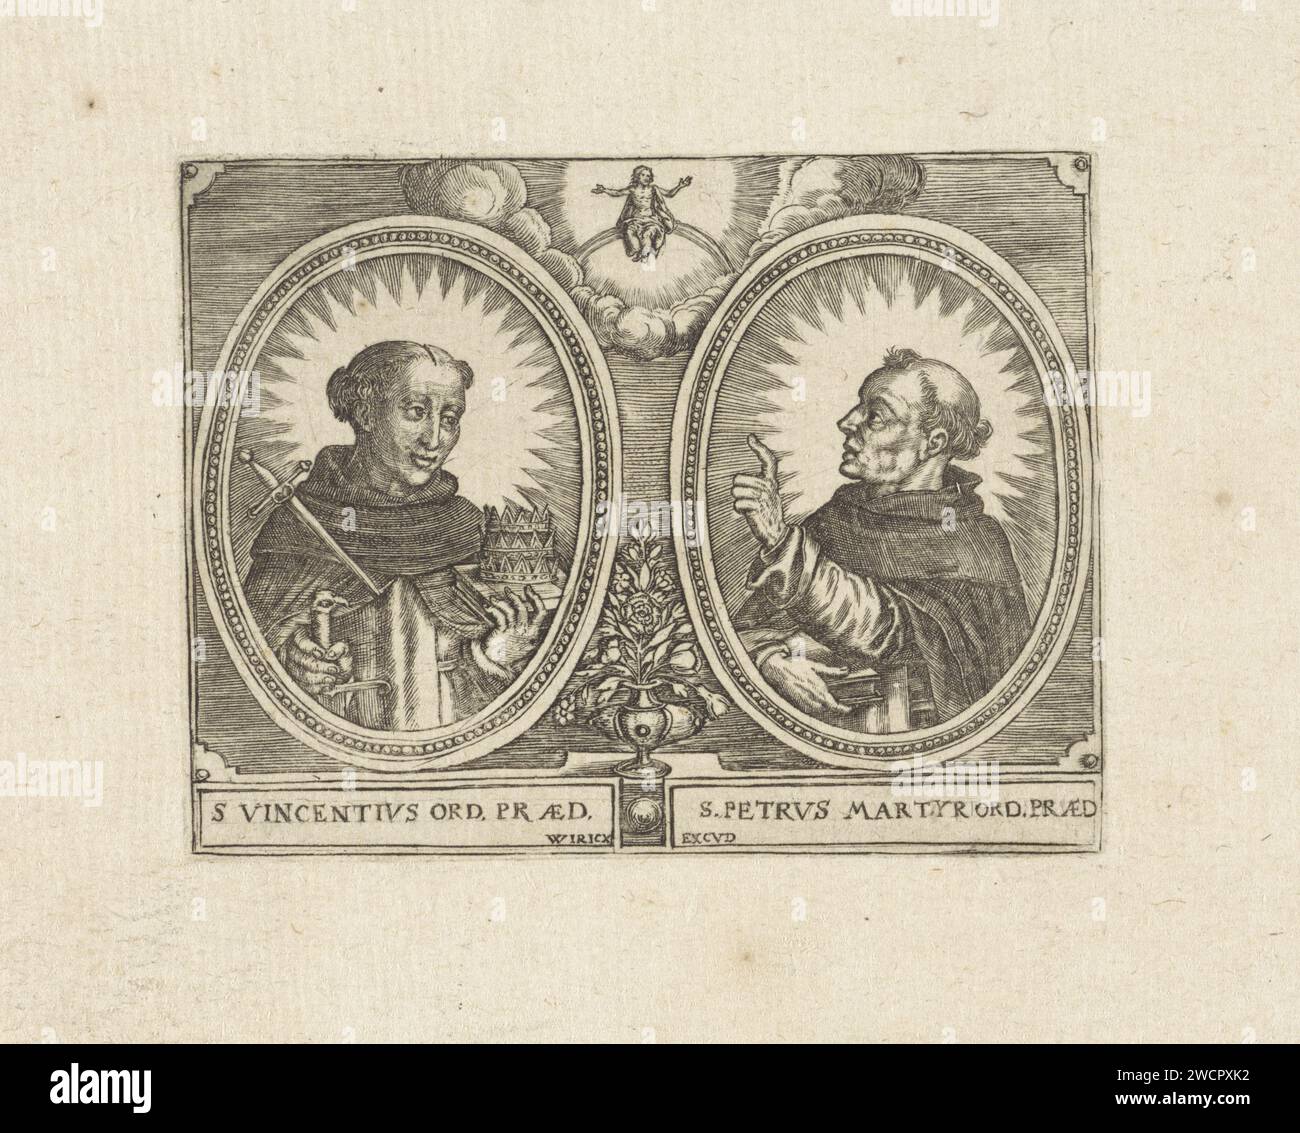 H. Vincent Ferrerius en H. Petrus Martyr van Verona, Wierix, 1550 - before 1619 print Left: Saint Peter Martyr van Verona, in Dominicaner Habijt, a wound in his skull and his chest with a sword. In one hand he still holds a sword, in the other a book on which three crowns lie. Right: Saint Vincentius Ferrerius, in Dominicaner Habijt, with books in hand. The names among the portraits are incorrect, probably mistakenly exchanged. The performances are caught in oval frames, in between Christ on the rainbow and a vase with flowers. Antwerp paper engraving the Dominican friar Peter Martyr of Verona Stock Photo